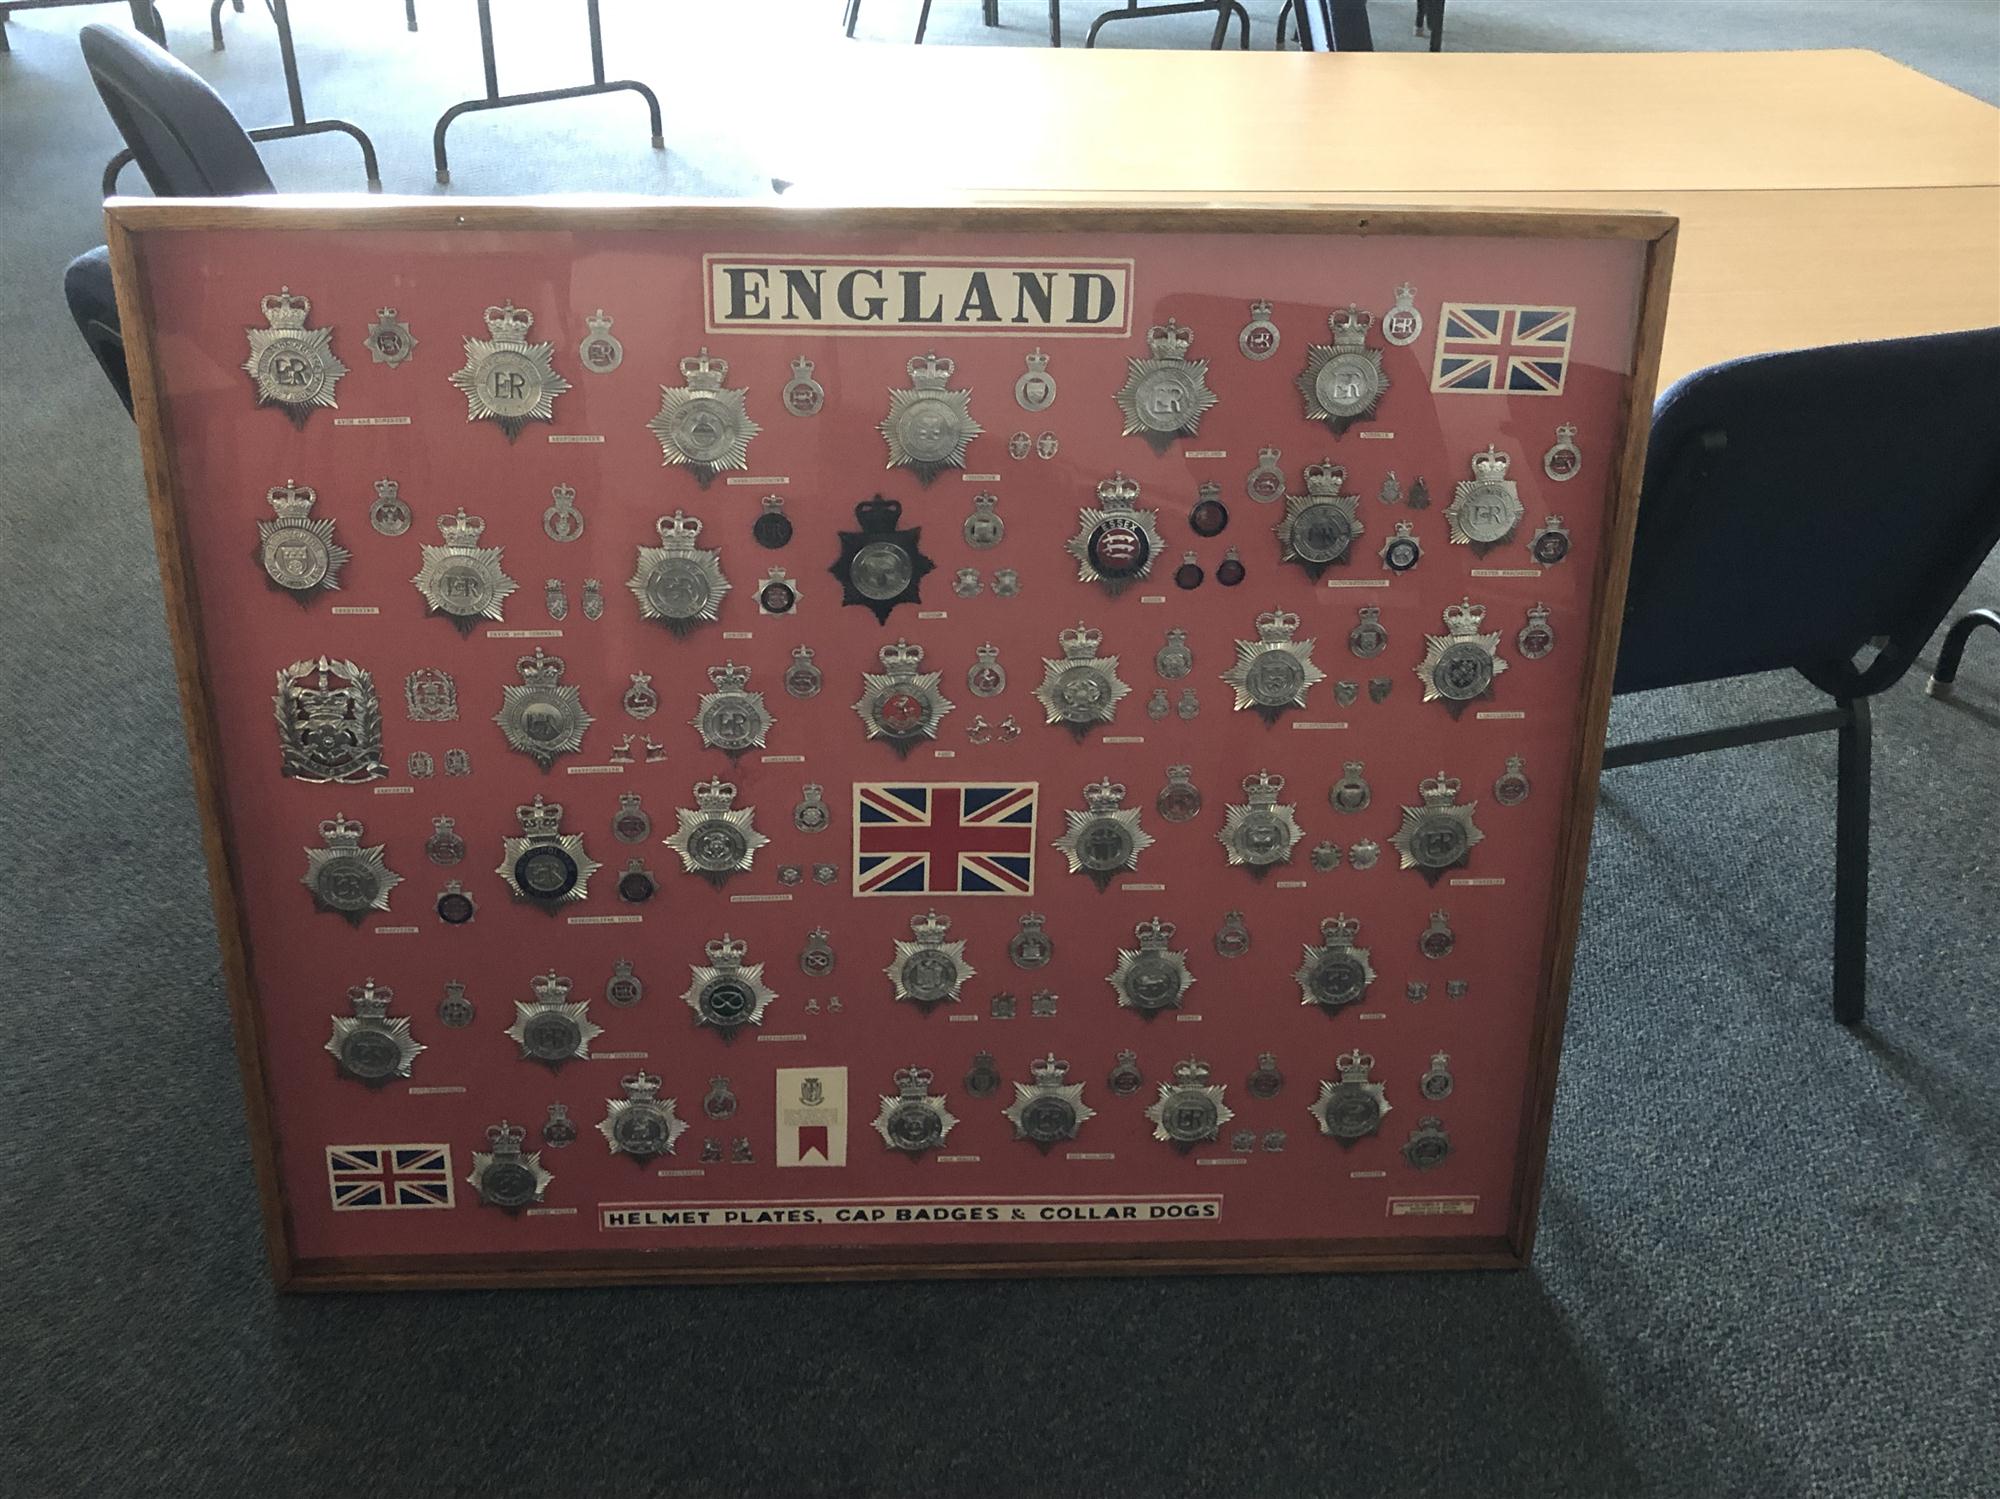 Badges from England